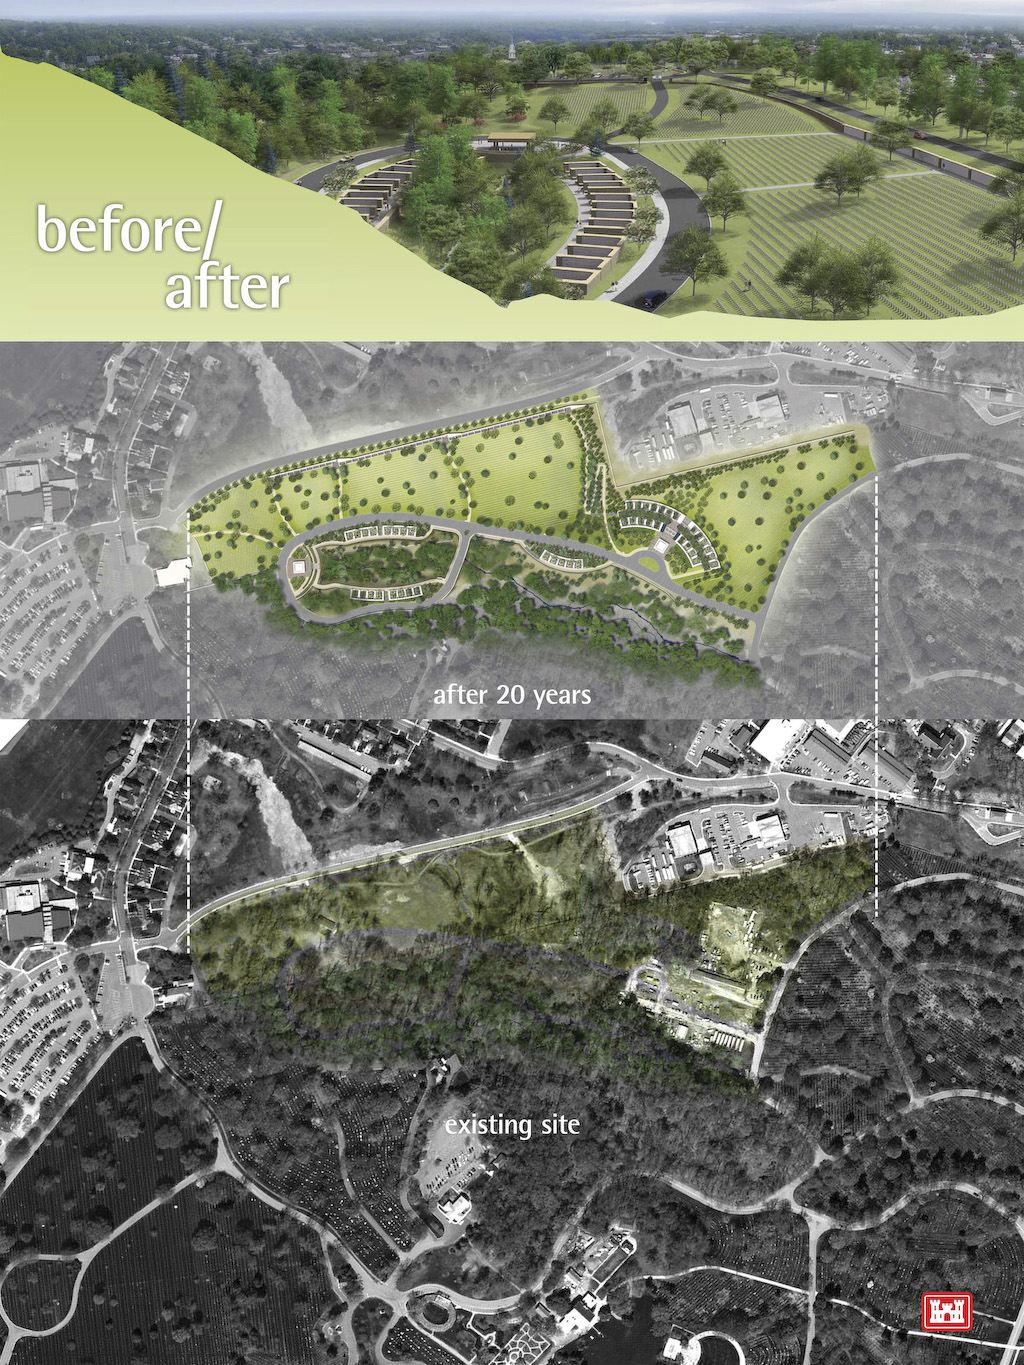 A graphic showing the environment assessment for the Arlington National Cemetery Millennium Project 